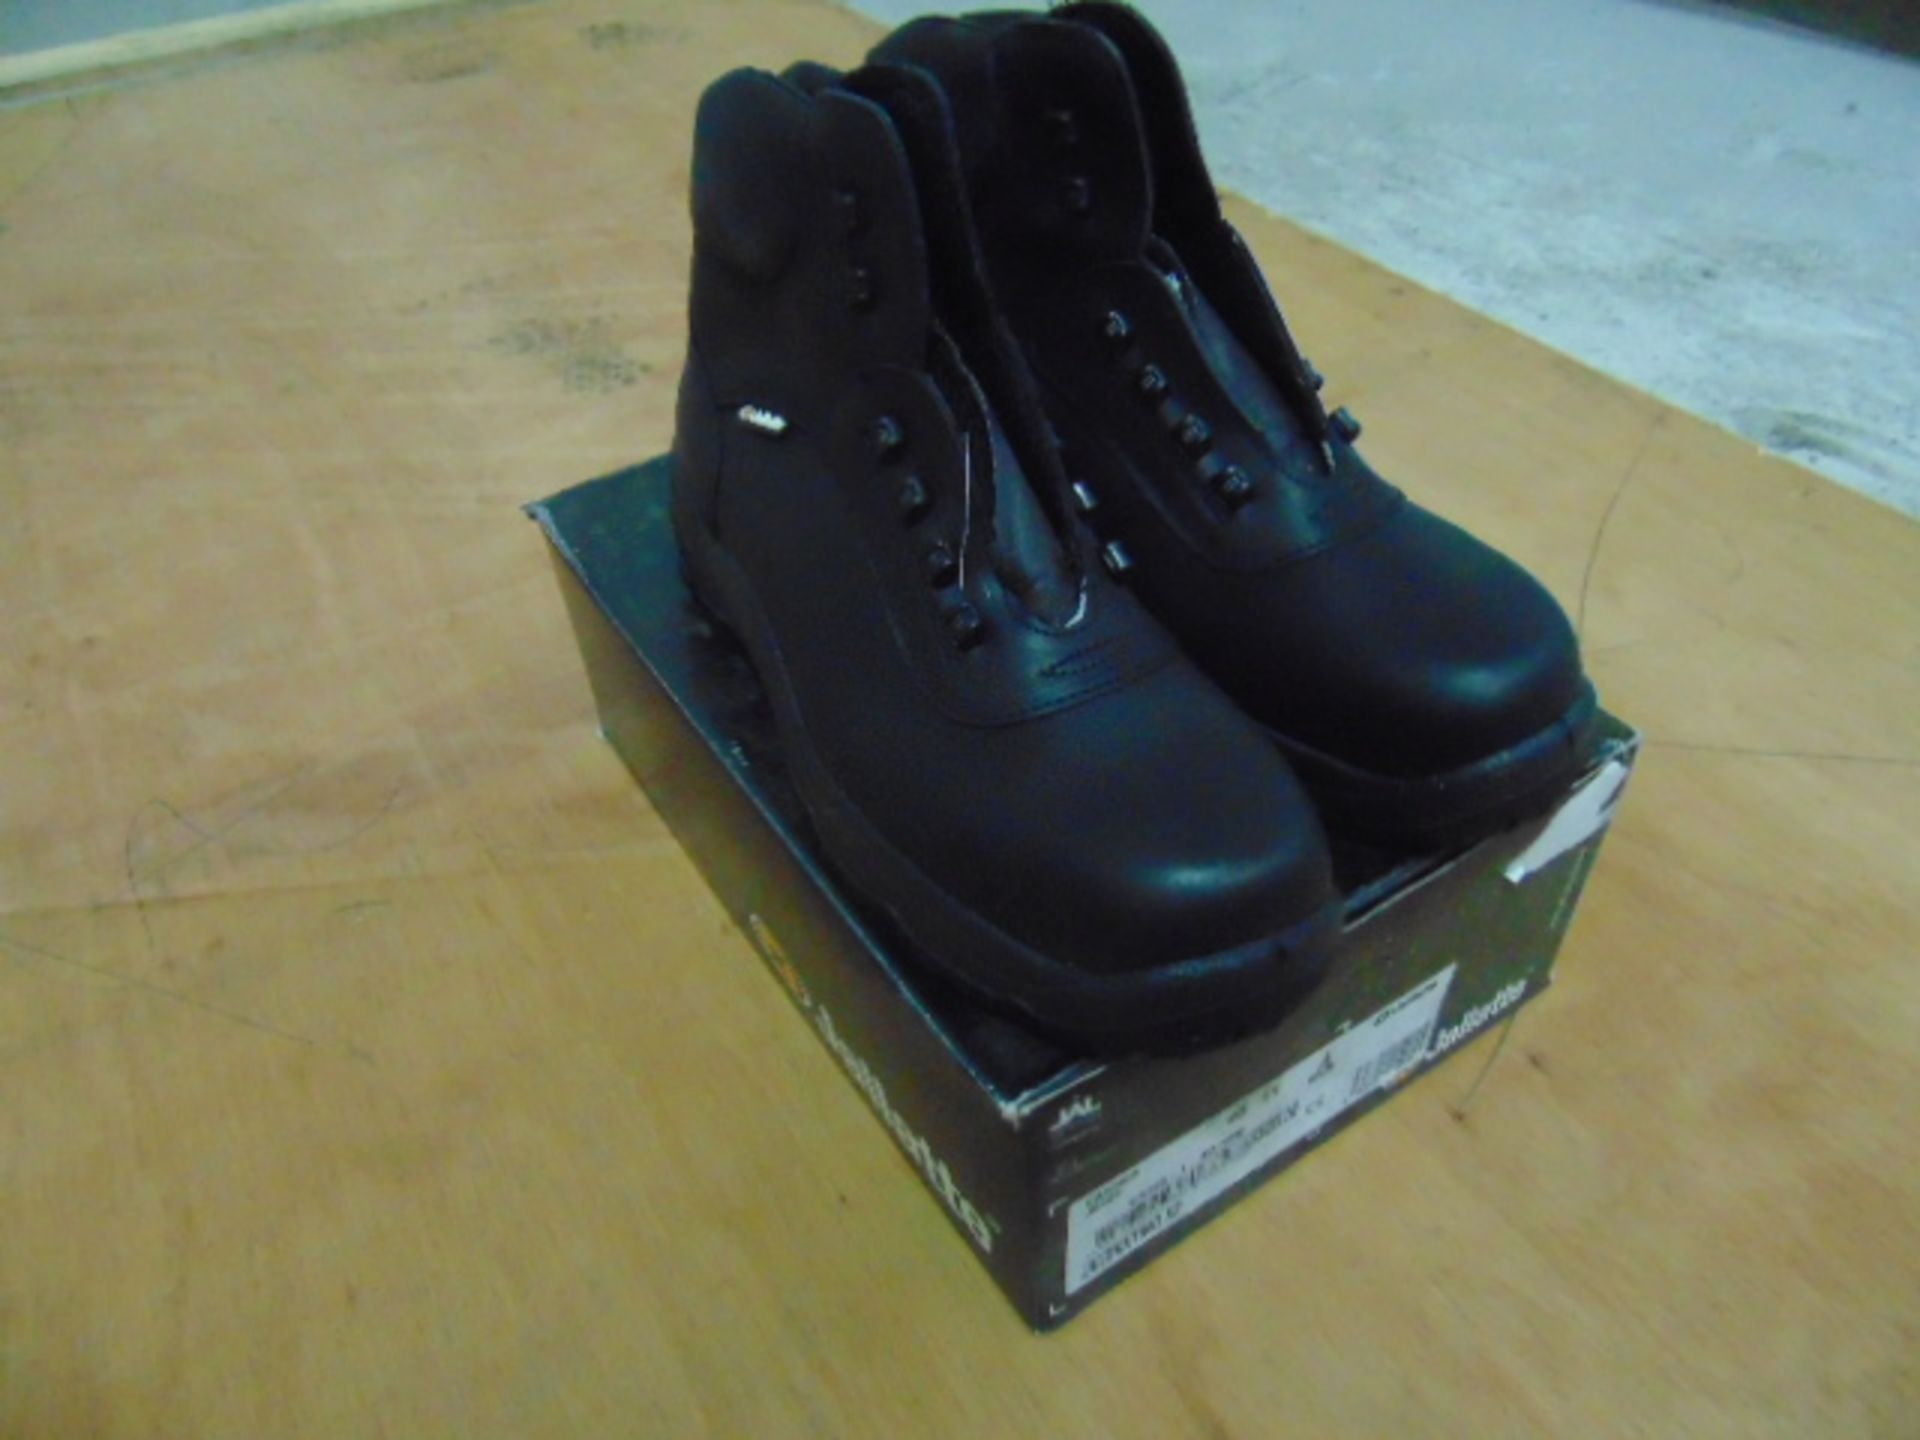 Pair of Unissued Jallatte Safety Boots Size 11 - Image 2 of 3